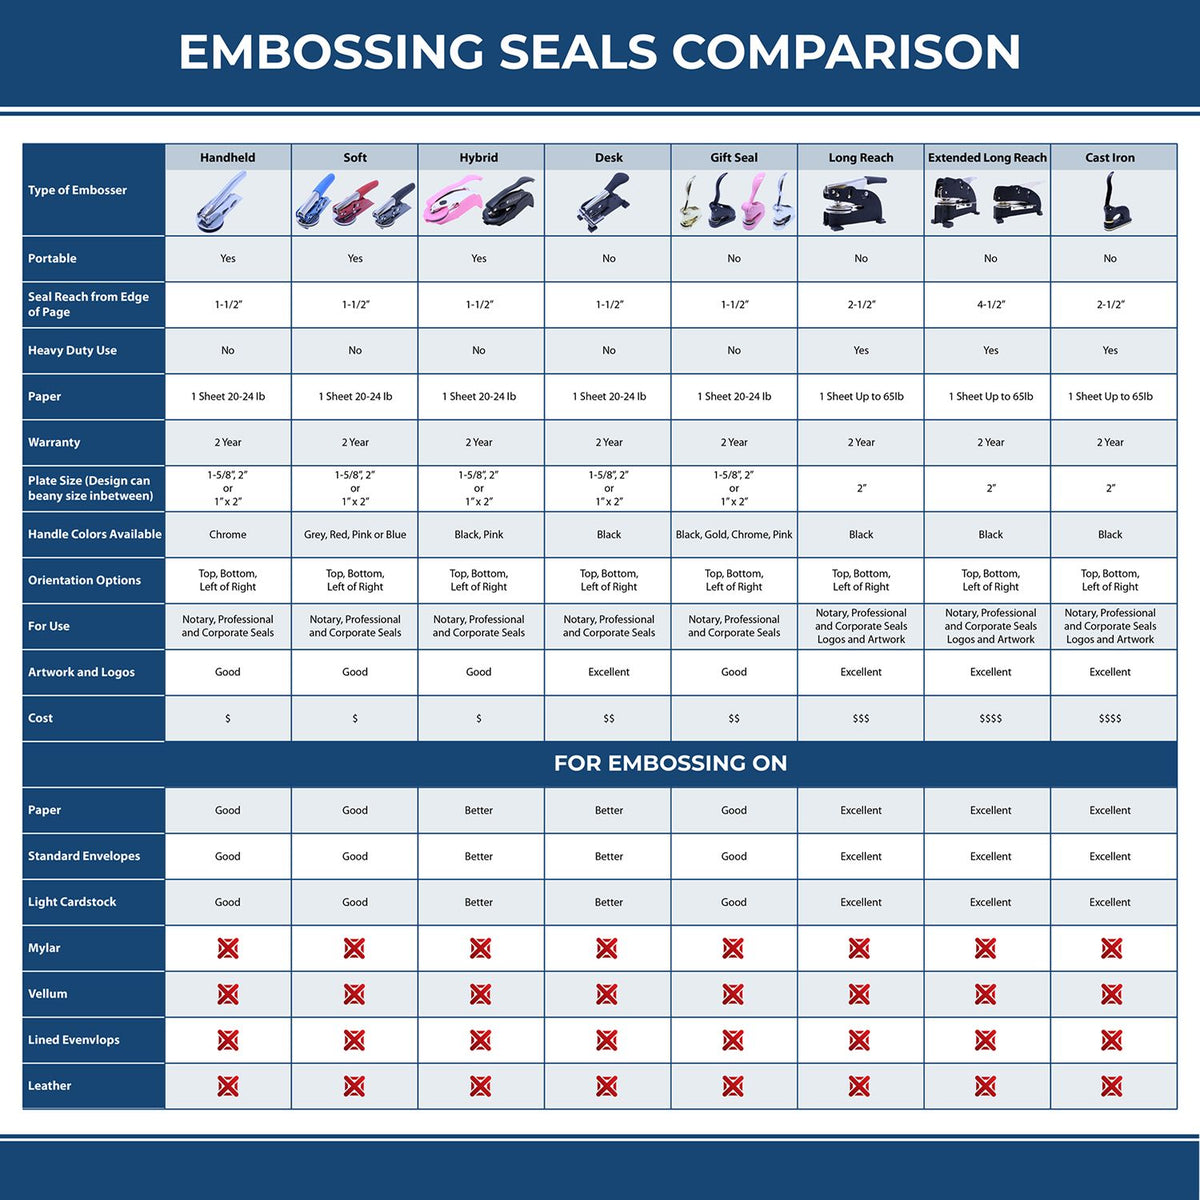 A comparison chart for the different types of mount models available for the Long Reach Tennessee Geology Seal